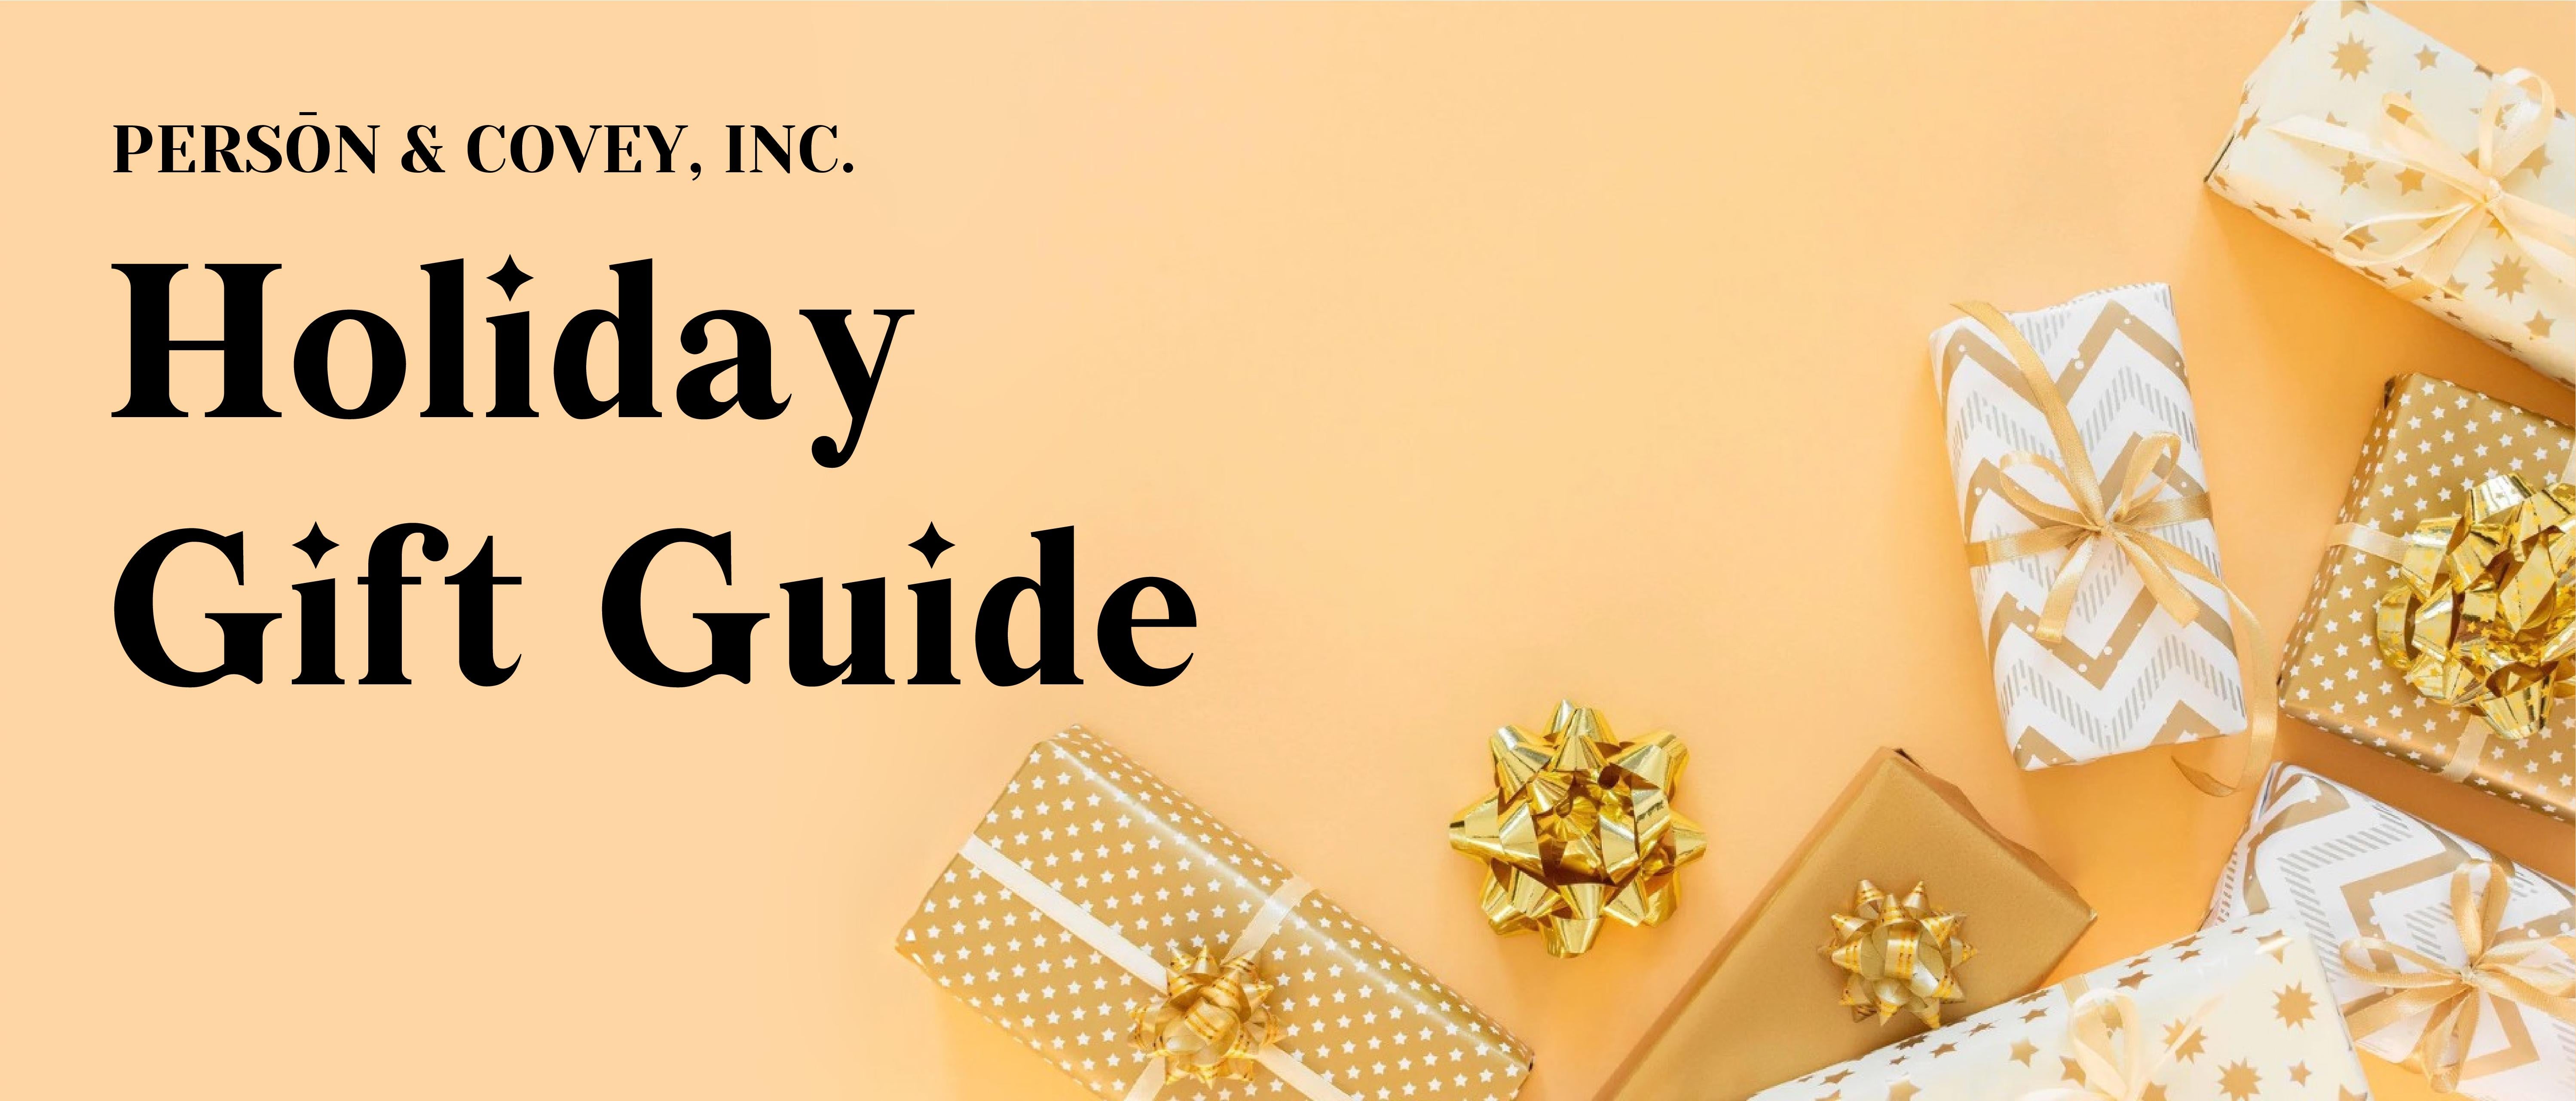 Person & Covey Holiday Gift Guide